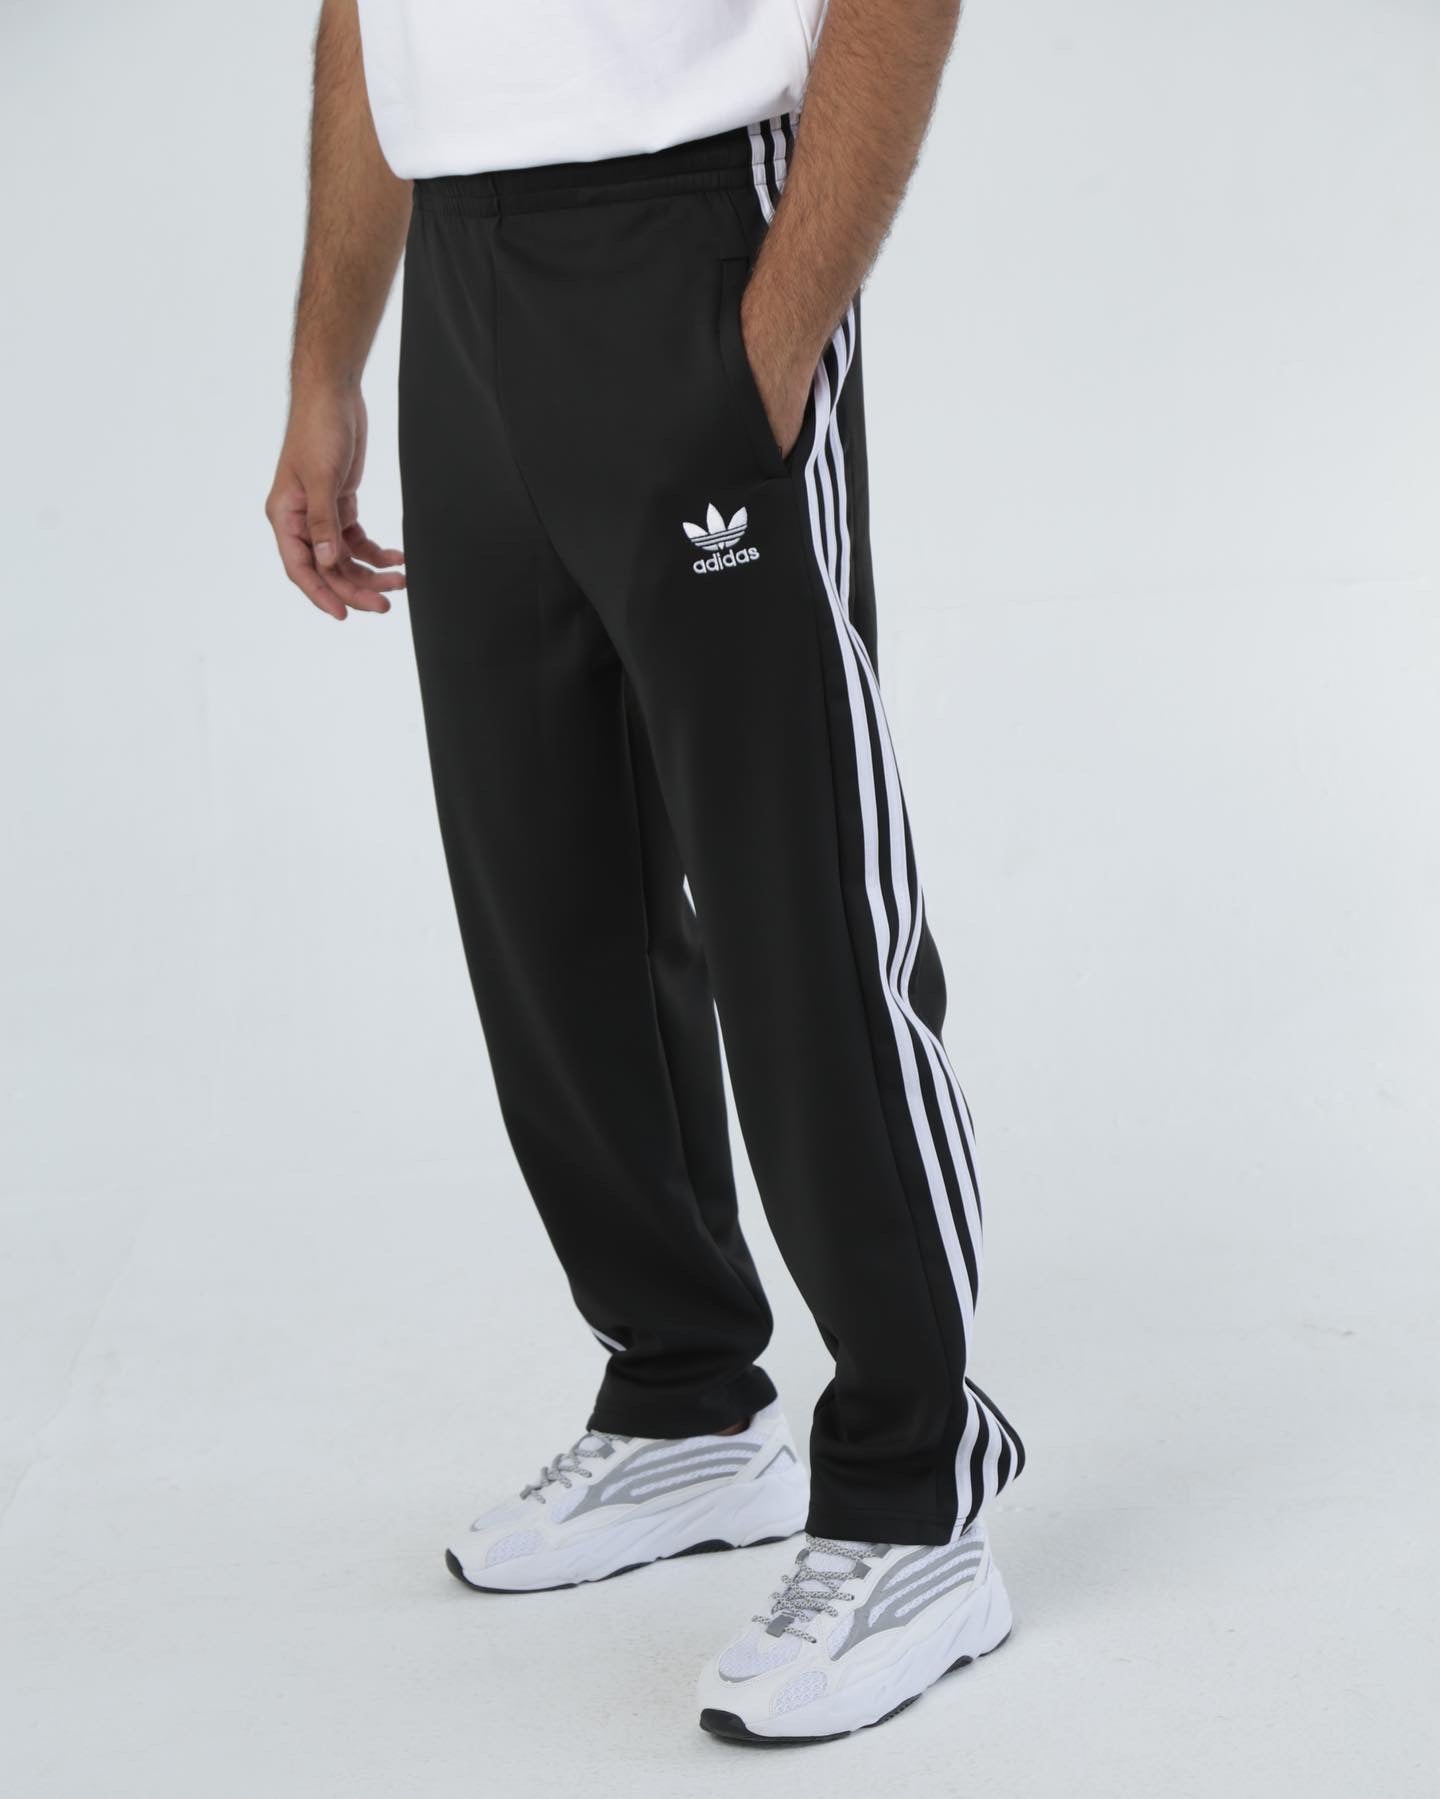 adidas Pants for Women - Sustainable Fashion - FARFETCH